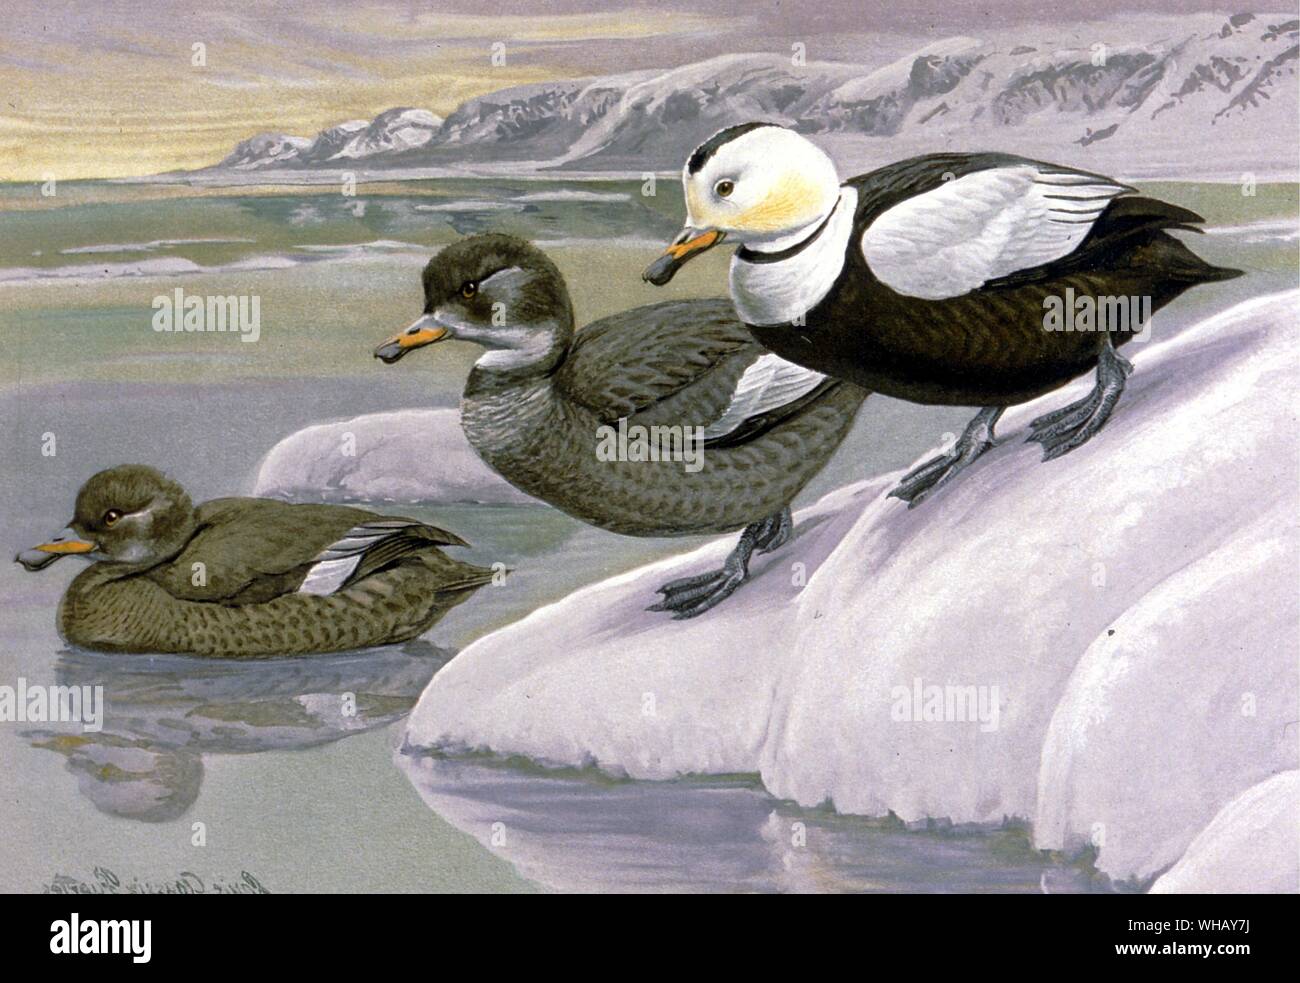 Labrador Ducks. Extinct Birds by Errol Fuller page 47. A study of the world's recently extinct bird species with colour and black and white illustrations. Stock Photo